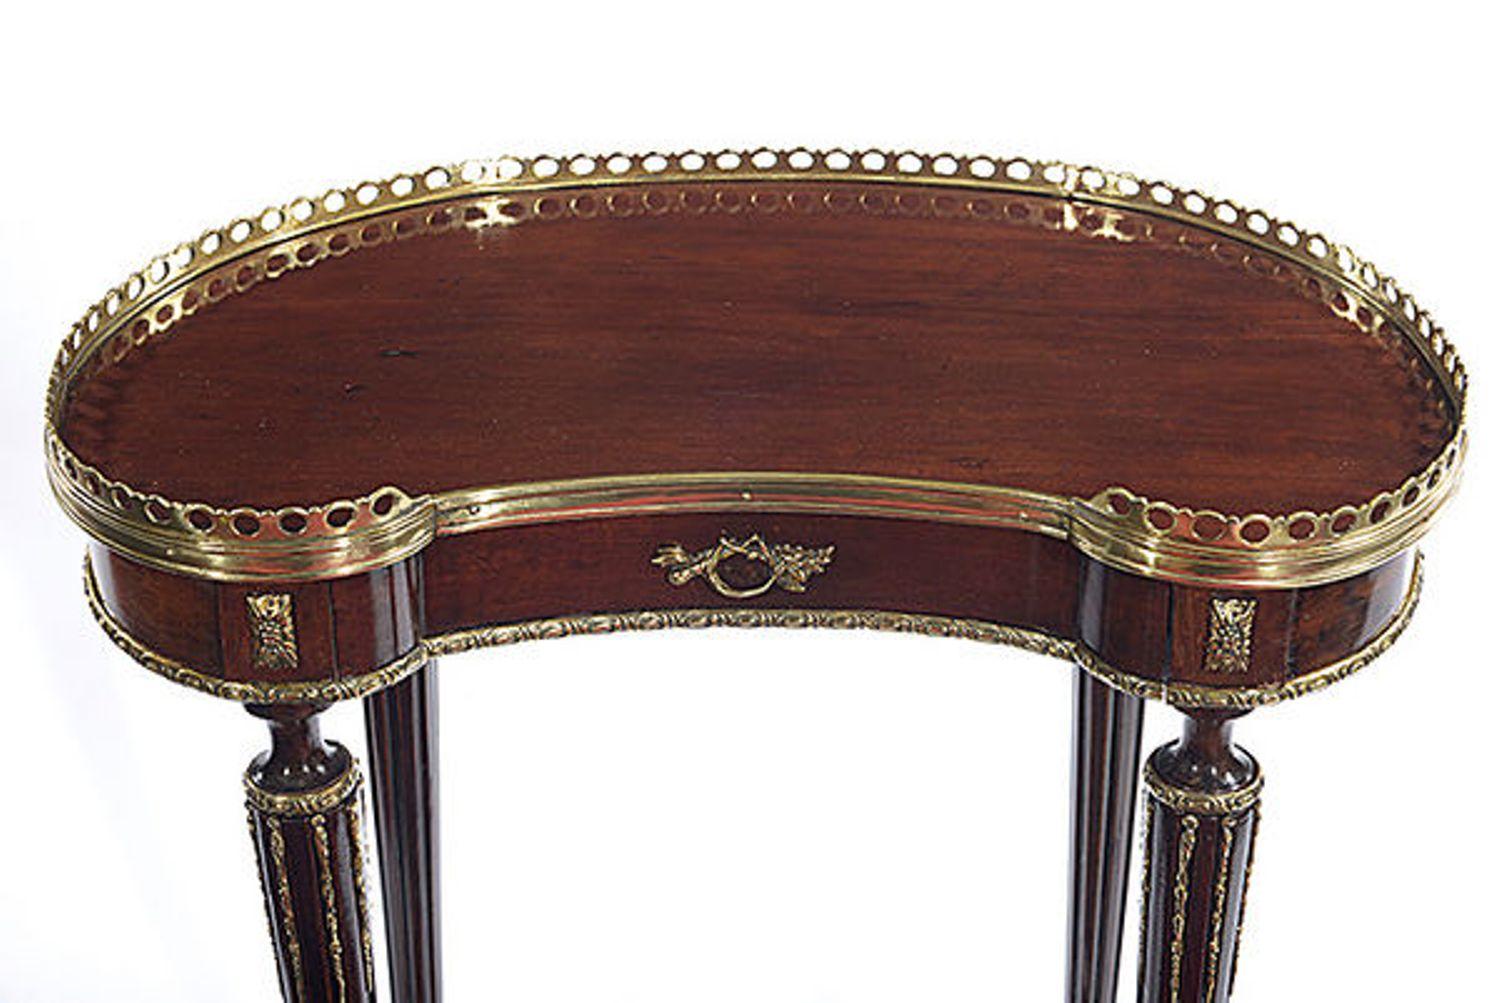 A Continental mahogany and metal mounted occasional table.
The kidney shaped top with a brass gallery and a fitted drawer with a brass handle.
The whole raised on four round tapered and fluted legs that unite with the stretcher below.